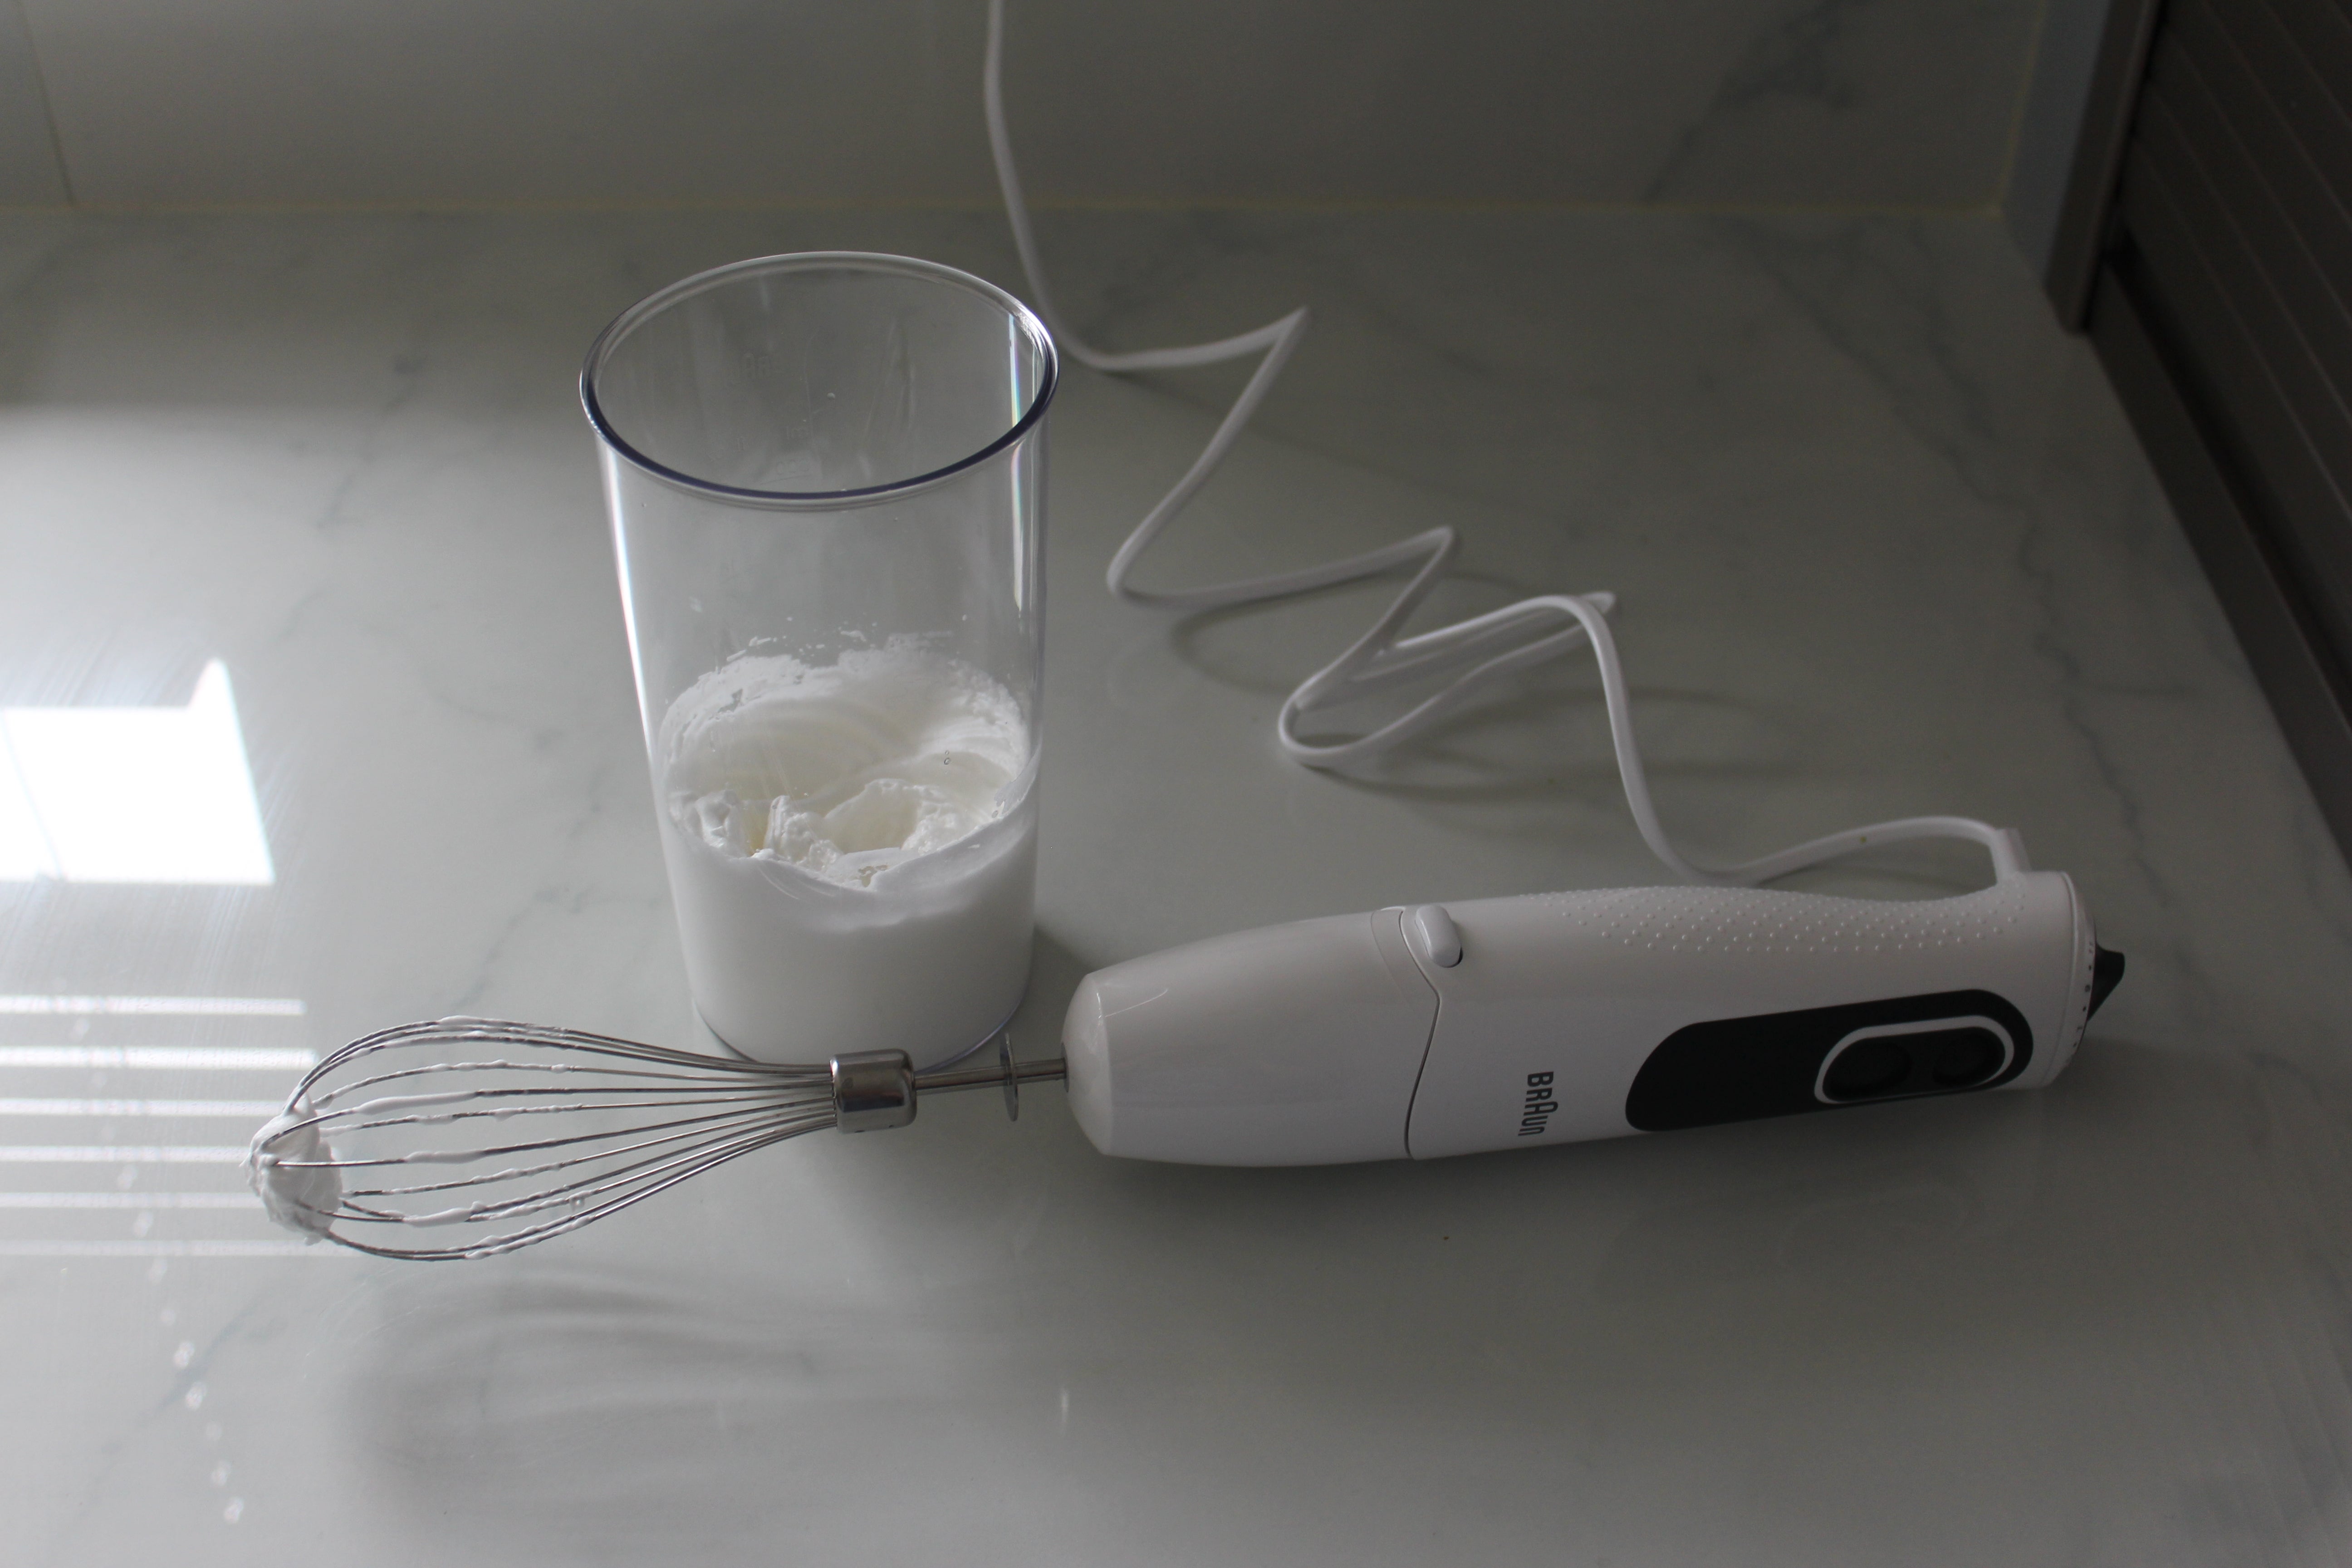 Braun MQ3126 MultiQuick Spice hand blender with whipped cream.